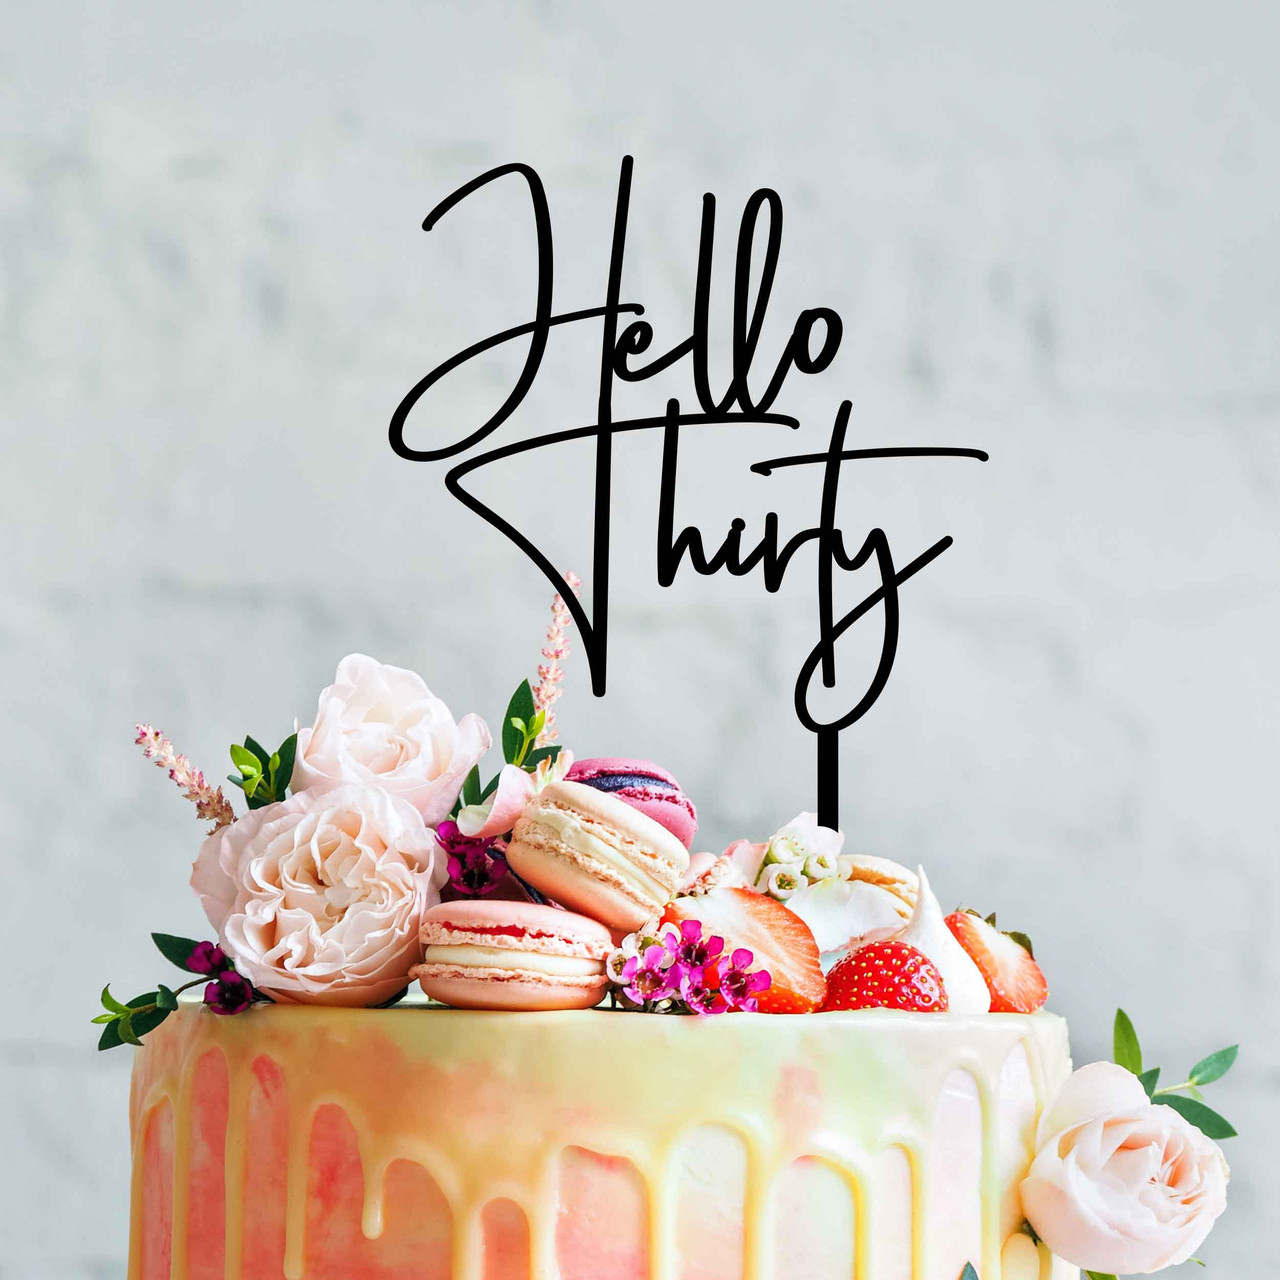 Hello Thirty Happy Birthday Cake Topper Gold Acrylic Number 30 Acrylic Cupcake  Topper for 30th Birthday Party Cake Decorations